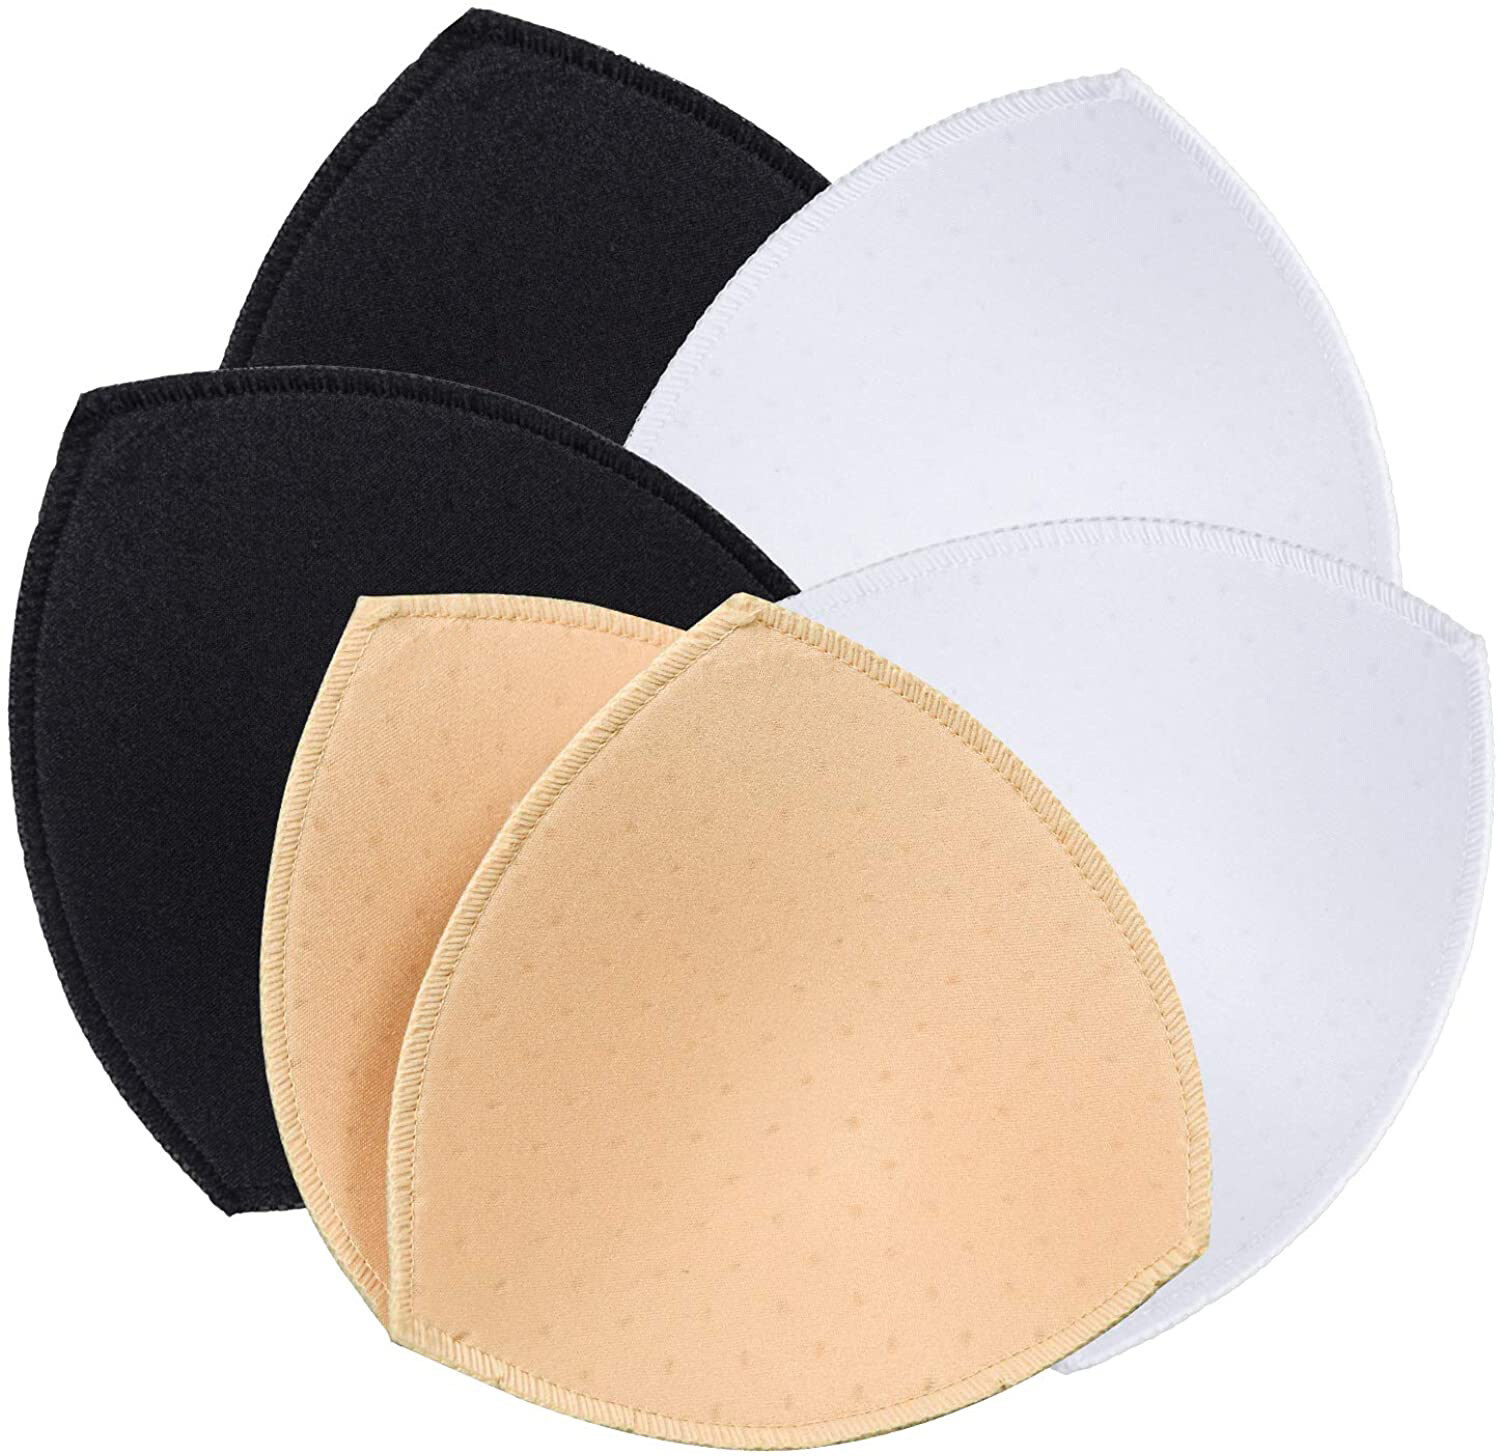 3 Pairs Removable Bra Pads Inserts with Vents Holes Women's Comfy Sports  Cups Bra Sewed Insert for Bikini Top Swimsuit (for Cup A/B/C/D/E/F)